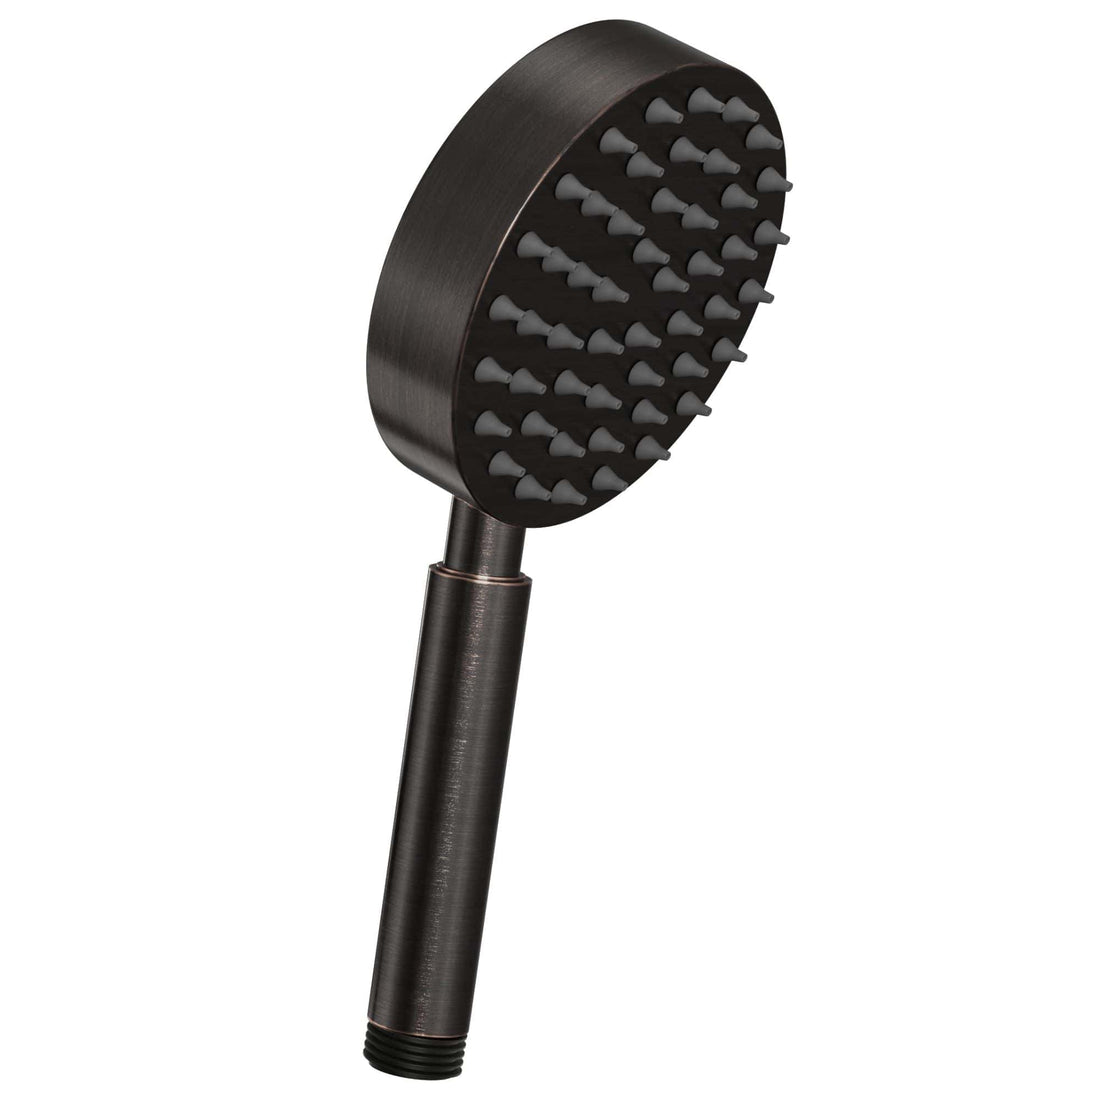 (Side Oil Rubbed Bronze) All Metal Hand Held Shower Head, 4 Inch Spray Wand, No Flow Restrictor | Made from 304 Stainless Steel with Silicone Nozzles | Works With All Hoses, Slide Bars & Wall Mount Holders - The Shower Head Store